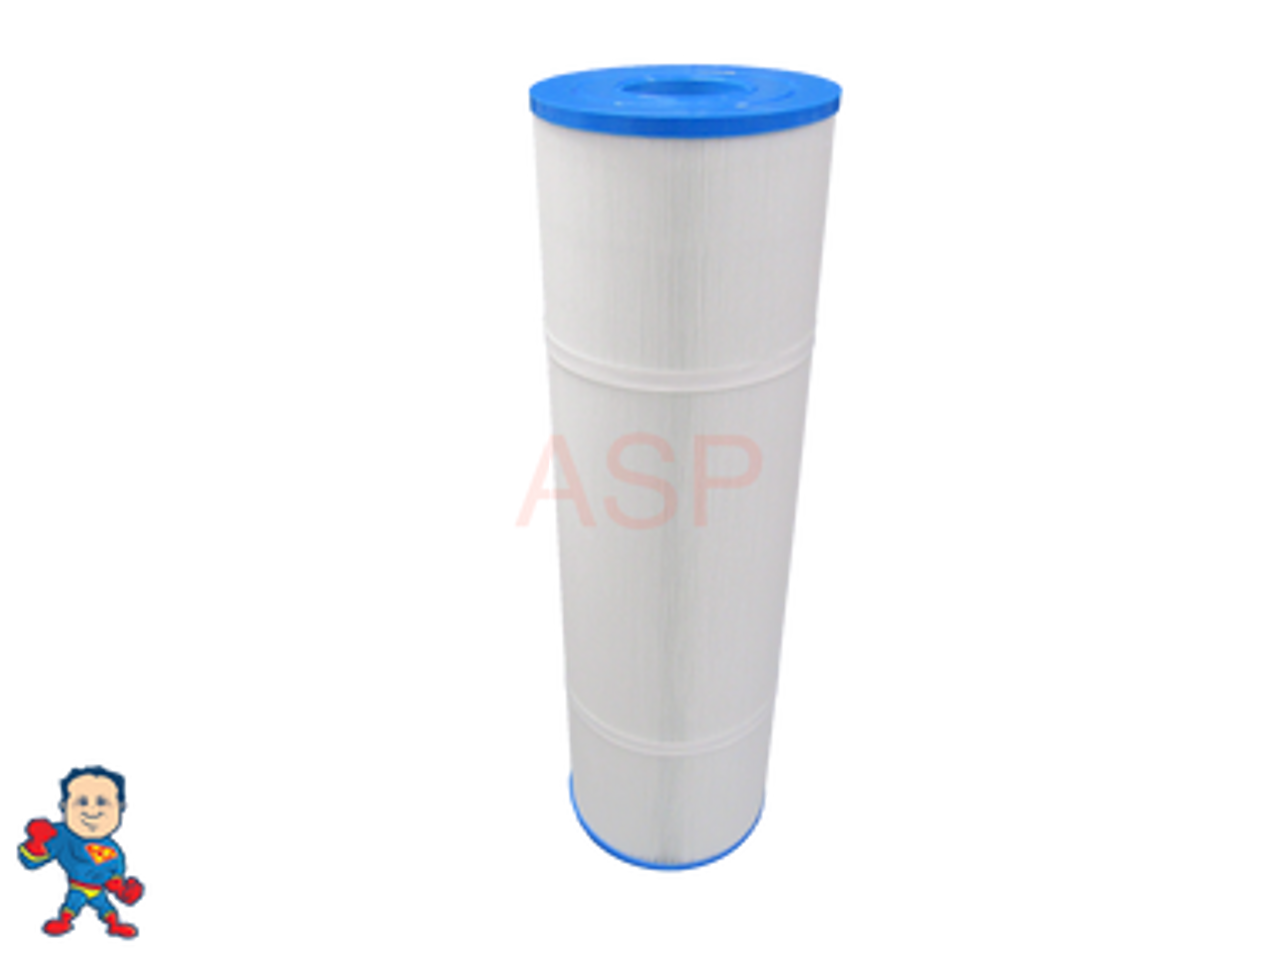 Filter, Cartridge, 17-3/4" x 5-5/16", 2-1/8" top, 2-1/8" bottom on Top and Bottom, 100sqft, Four Winds Swim Spa H2O